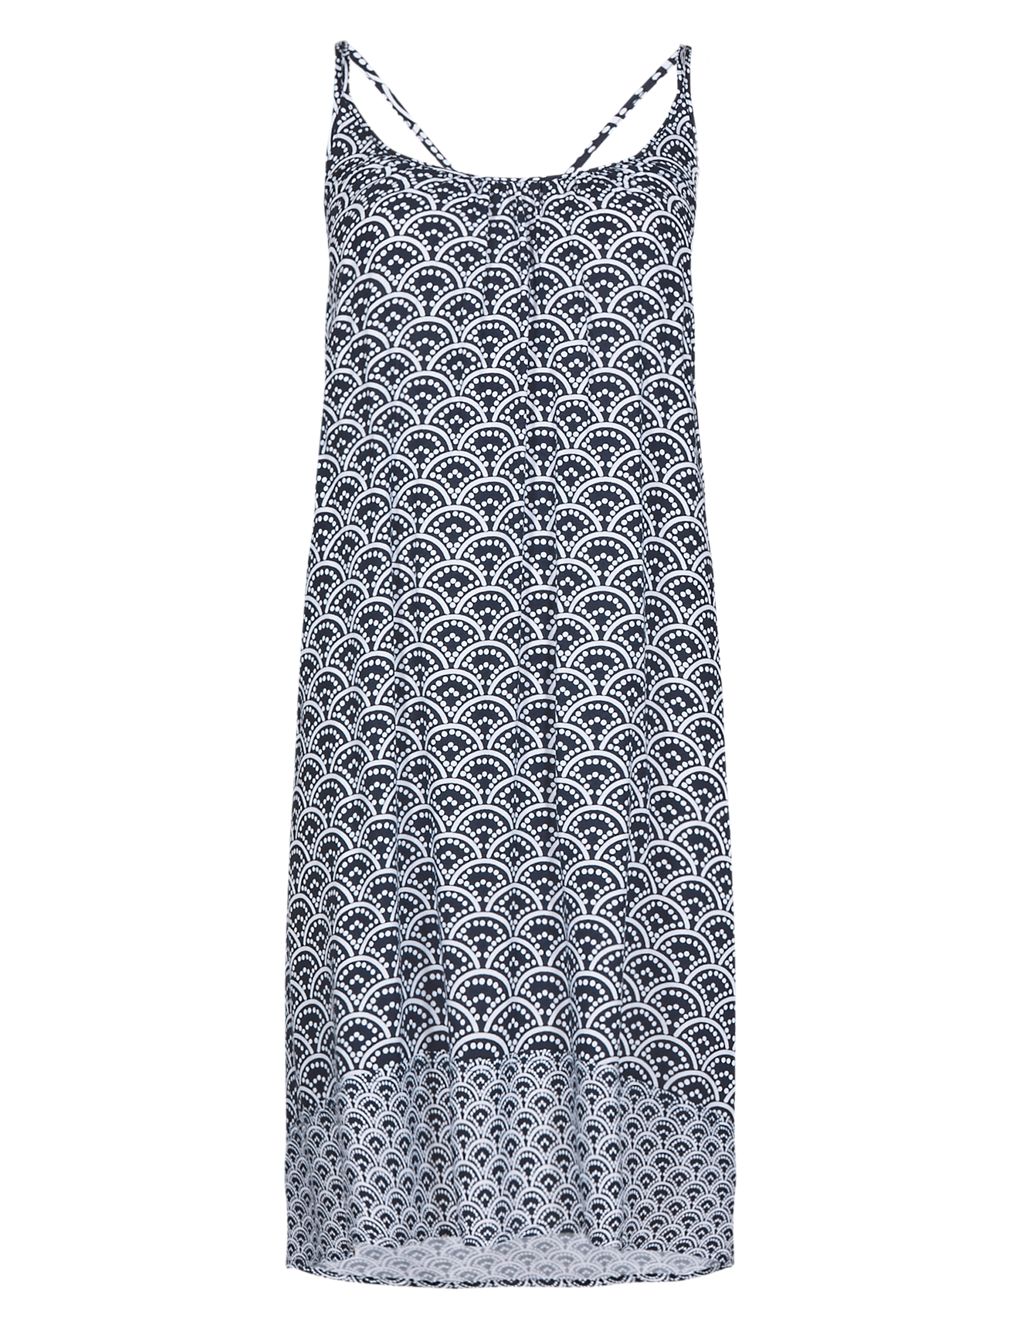 Cross Back Spotted Scallop Print Shift Dress 1 of 4